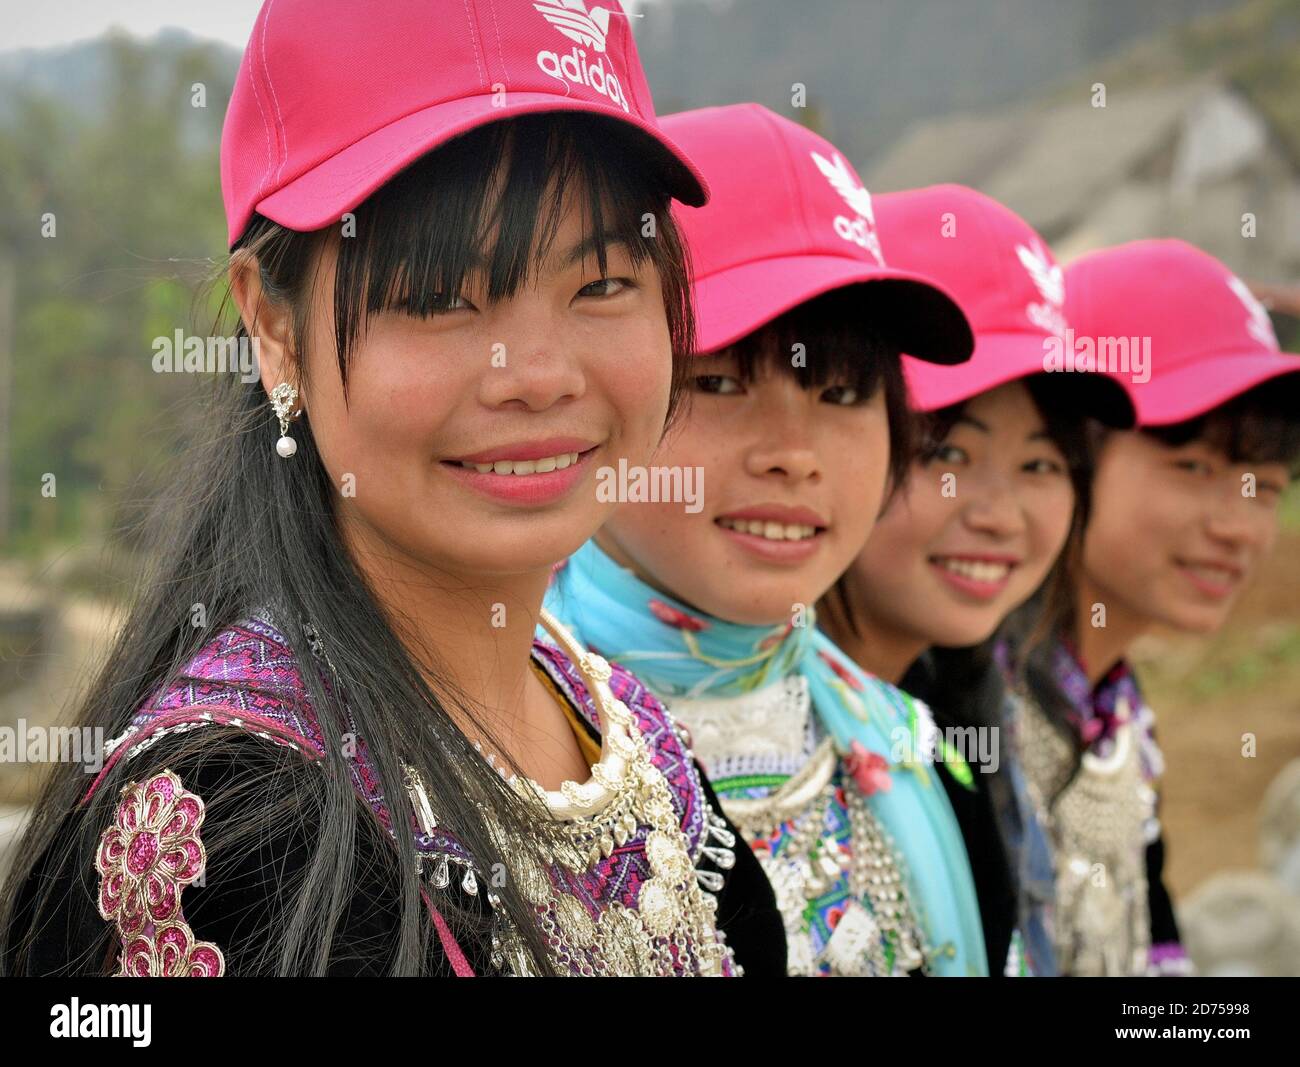 Four Vietnamese Hmong hill-tribe teen girls sit in a row, wear modern pink baseball caps and traditional tribal attire, pose together for the camera. Stock Photo